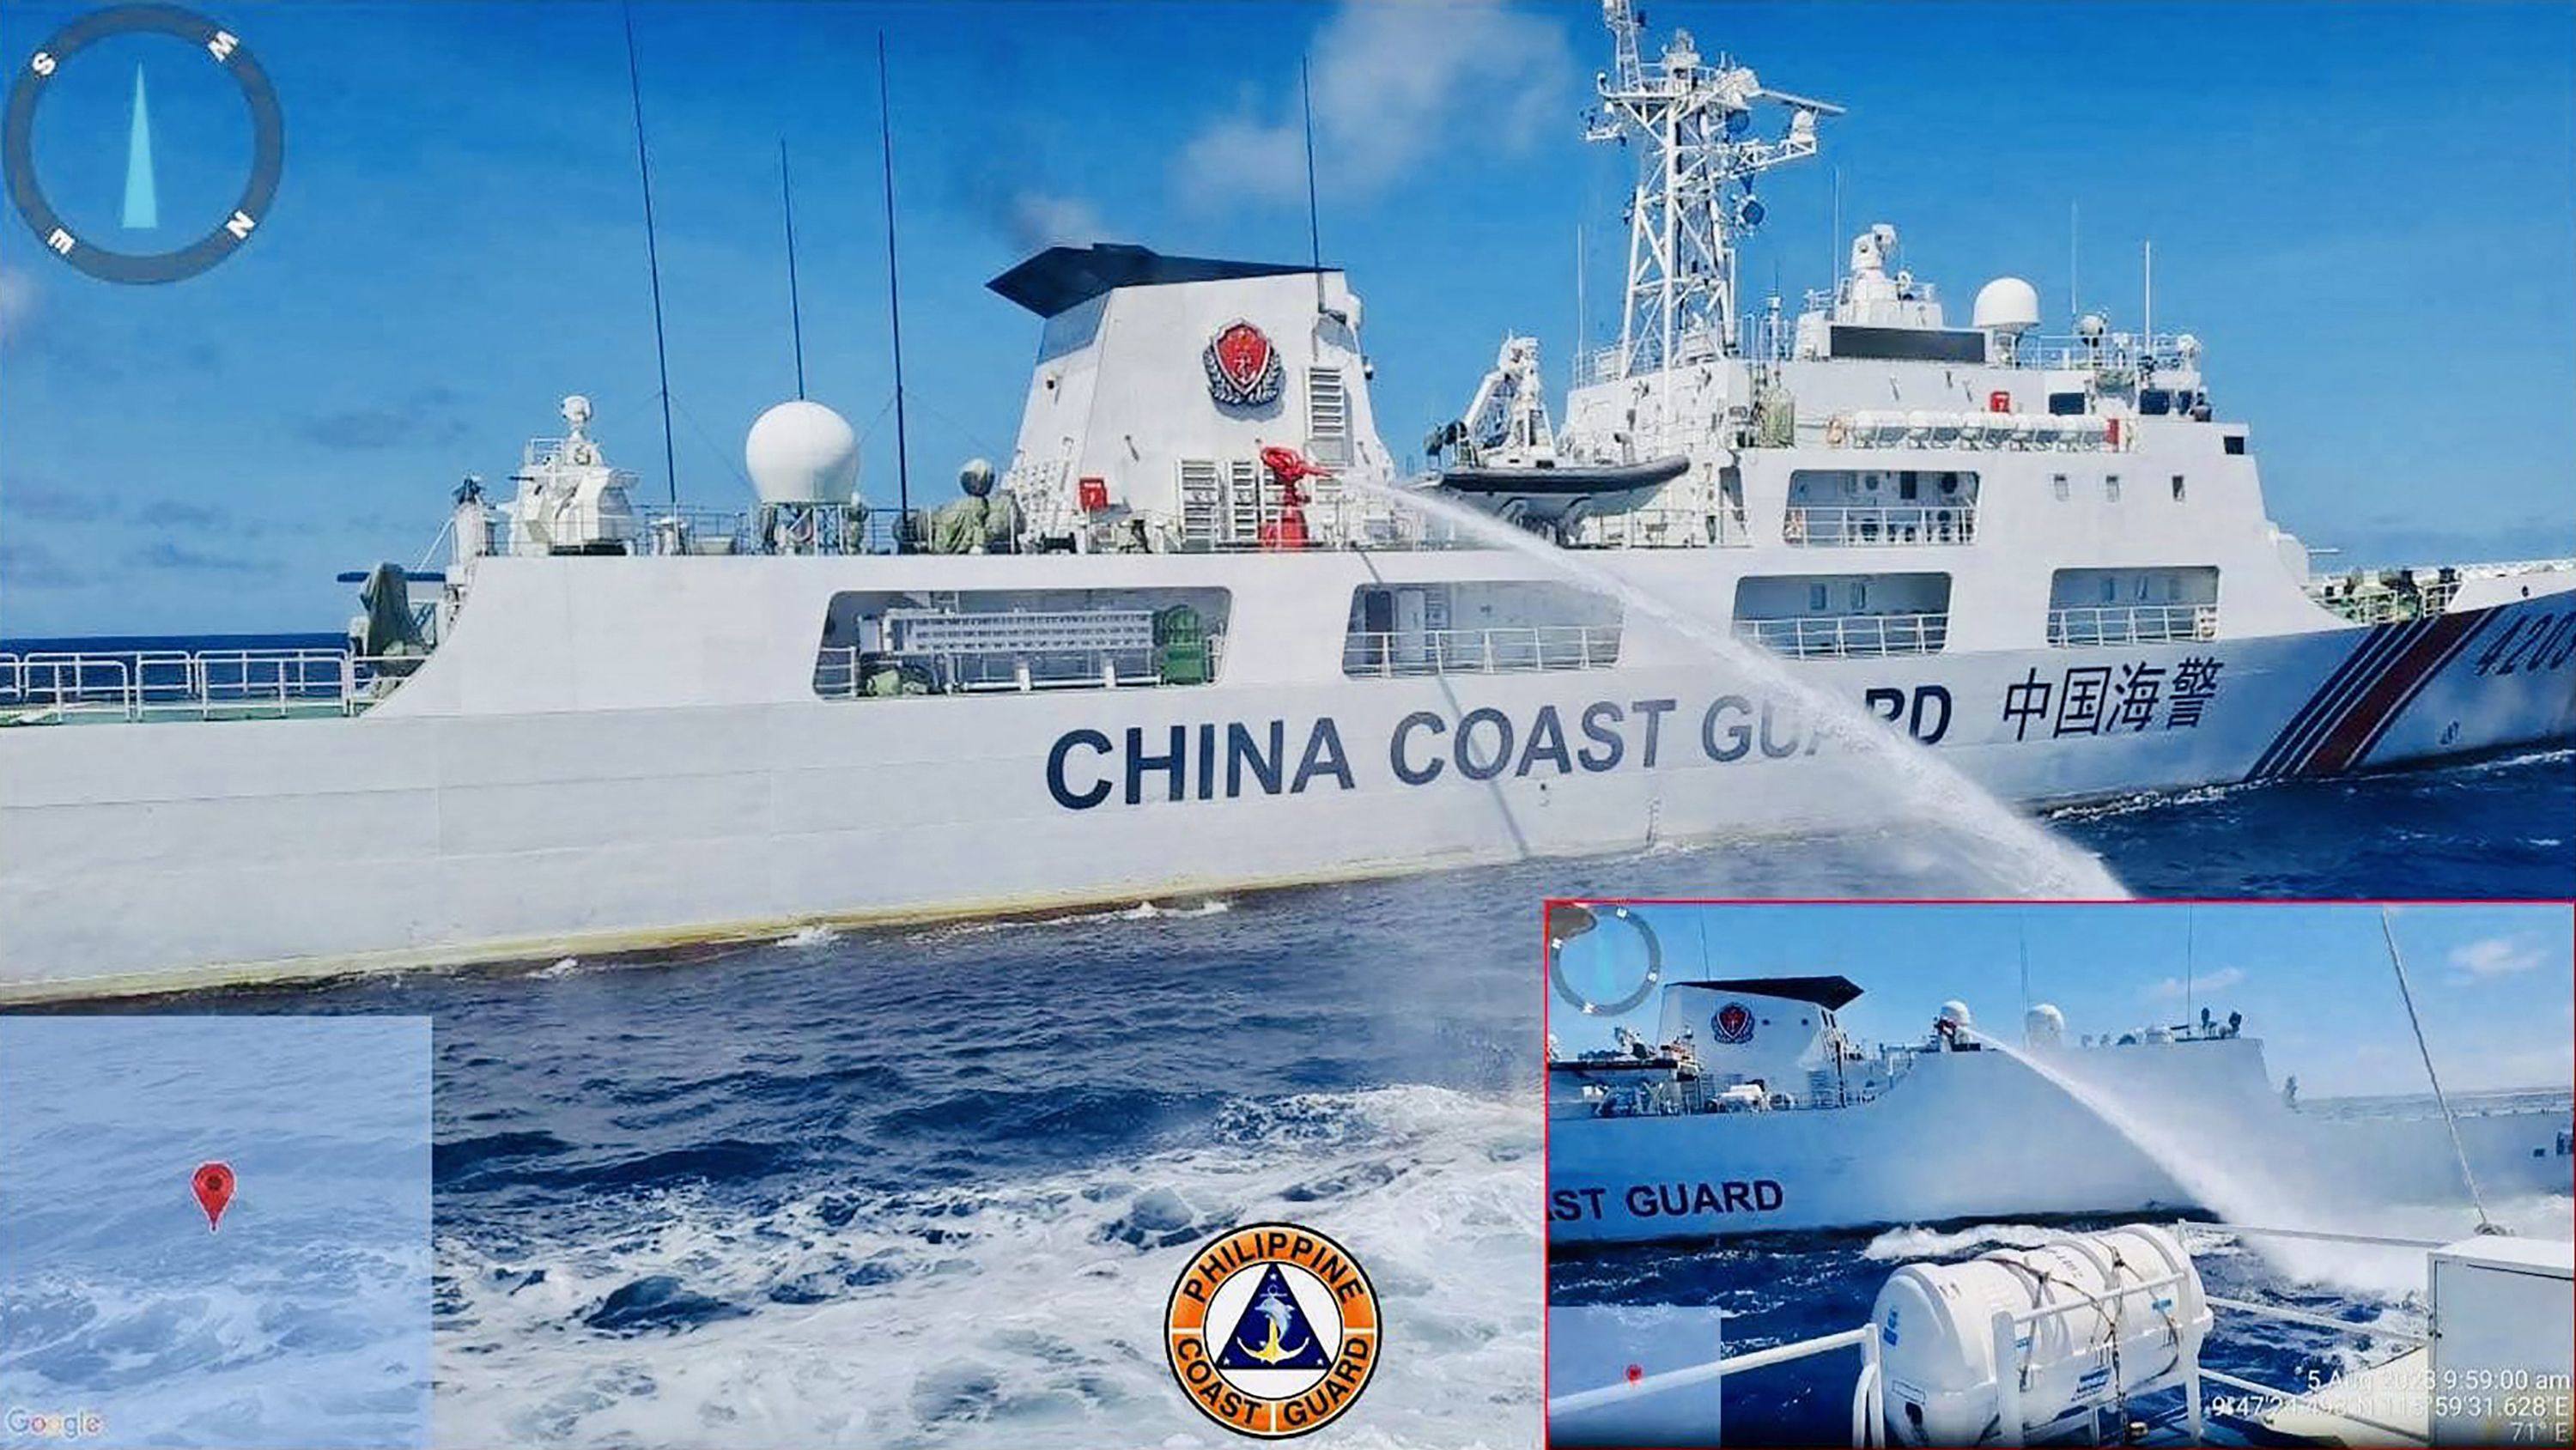 A composite image released by the Philippine Coast Guard shows a Chinese coastguard ship using water cannon on a Philippine vessel near Second Thomas Shoal during a re-supply mission in August. Photo: Philippine Coast Guard / Handout via AFP